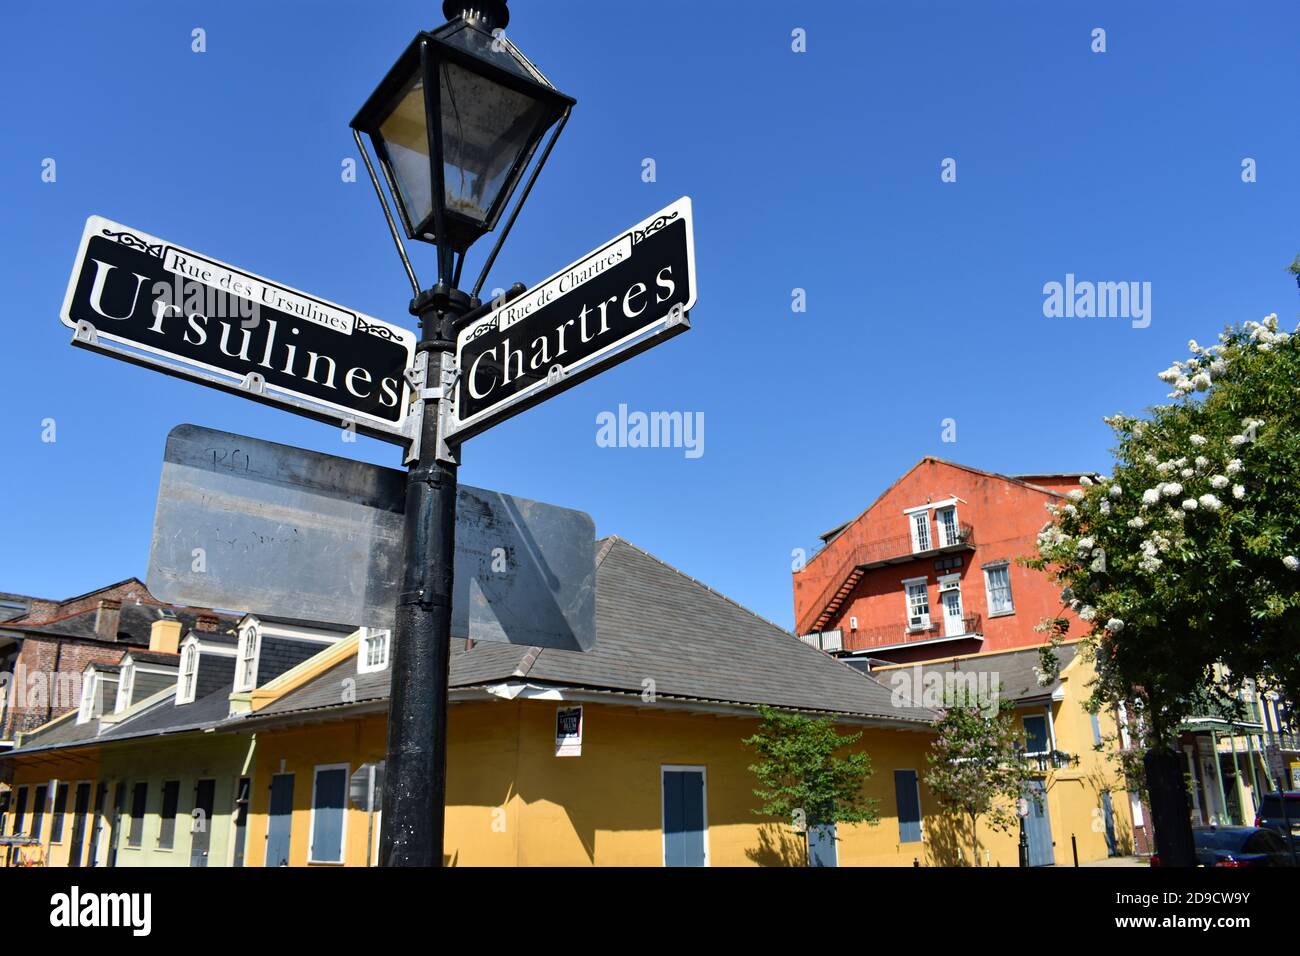 A traditional street sign post with a lamp on top points the way for Ursulines Street and Chartres Street in the historic French Quarter, New Orleans. Stock Photo